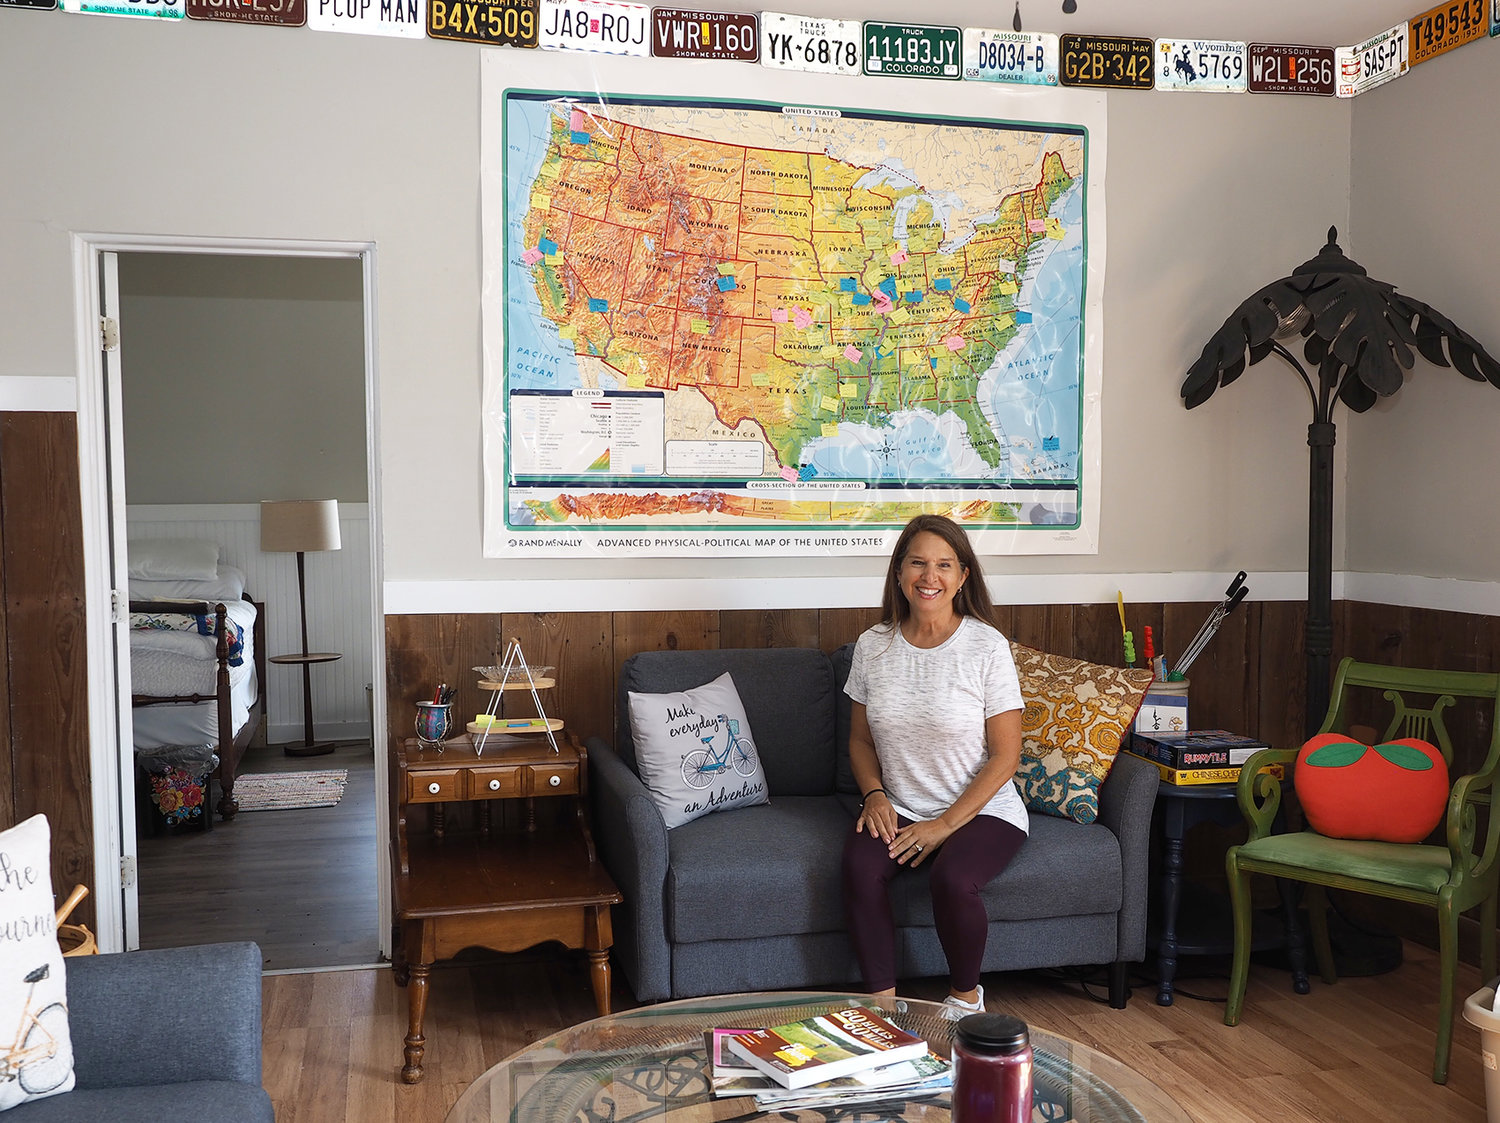 The Happy Apple Bicycle Bunkhouse is open for its second season. Bikers from the Katy Trail or other groups can rent a room or the entire house from May through August. Owner Joette Reidy is pictured here with a map that visitors can mark with their home state.